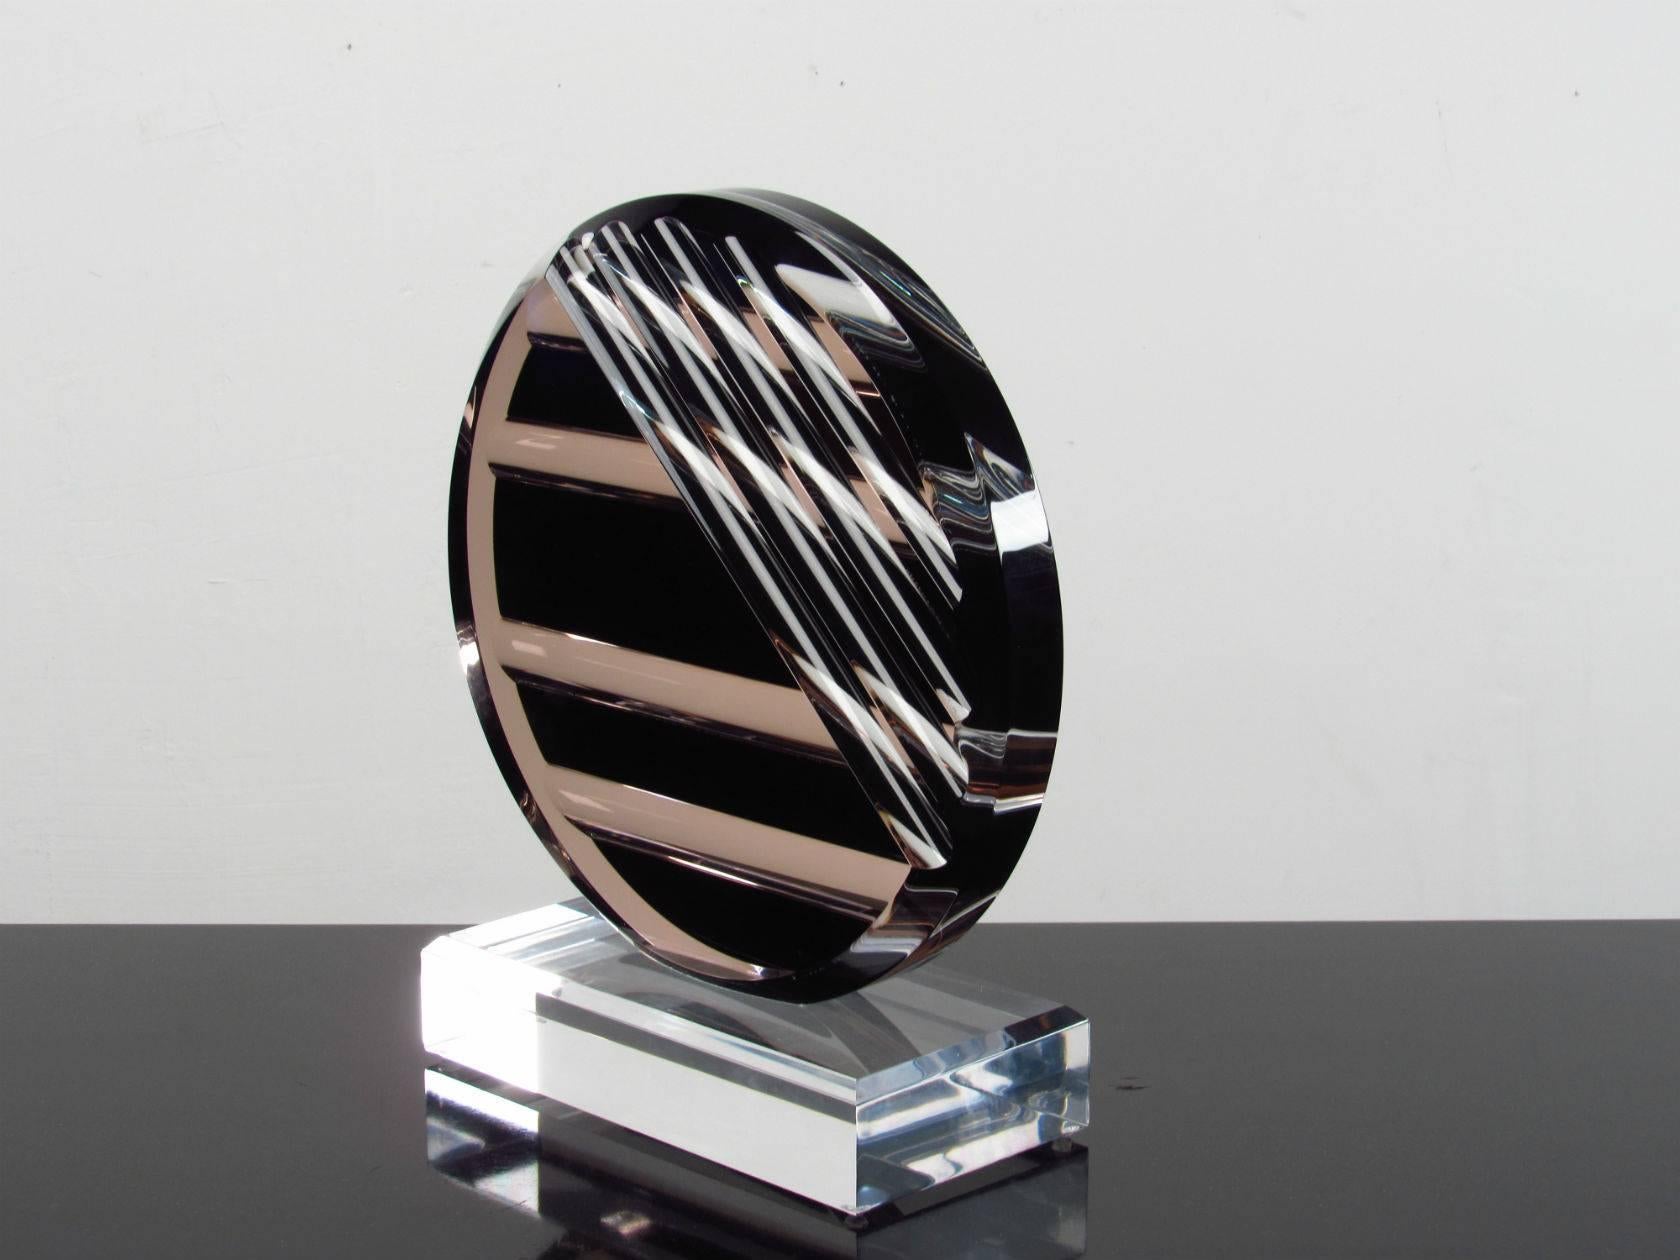 Lucite 1980s Abstract Modern Disc Sculpture.  Cool modern sculpture of thick carved lucite with geometric pattern.  Attribution to Schlomi Haziza. 